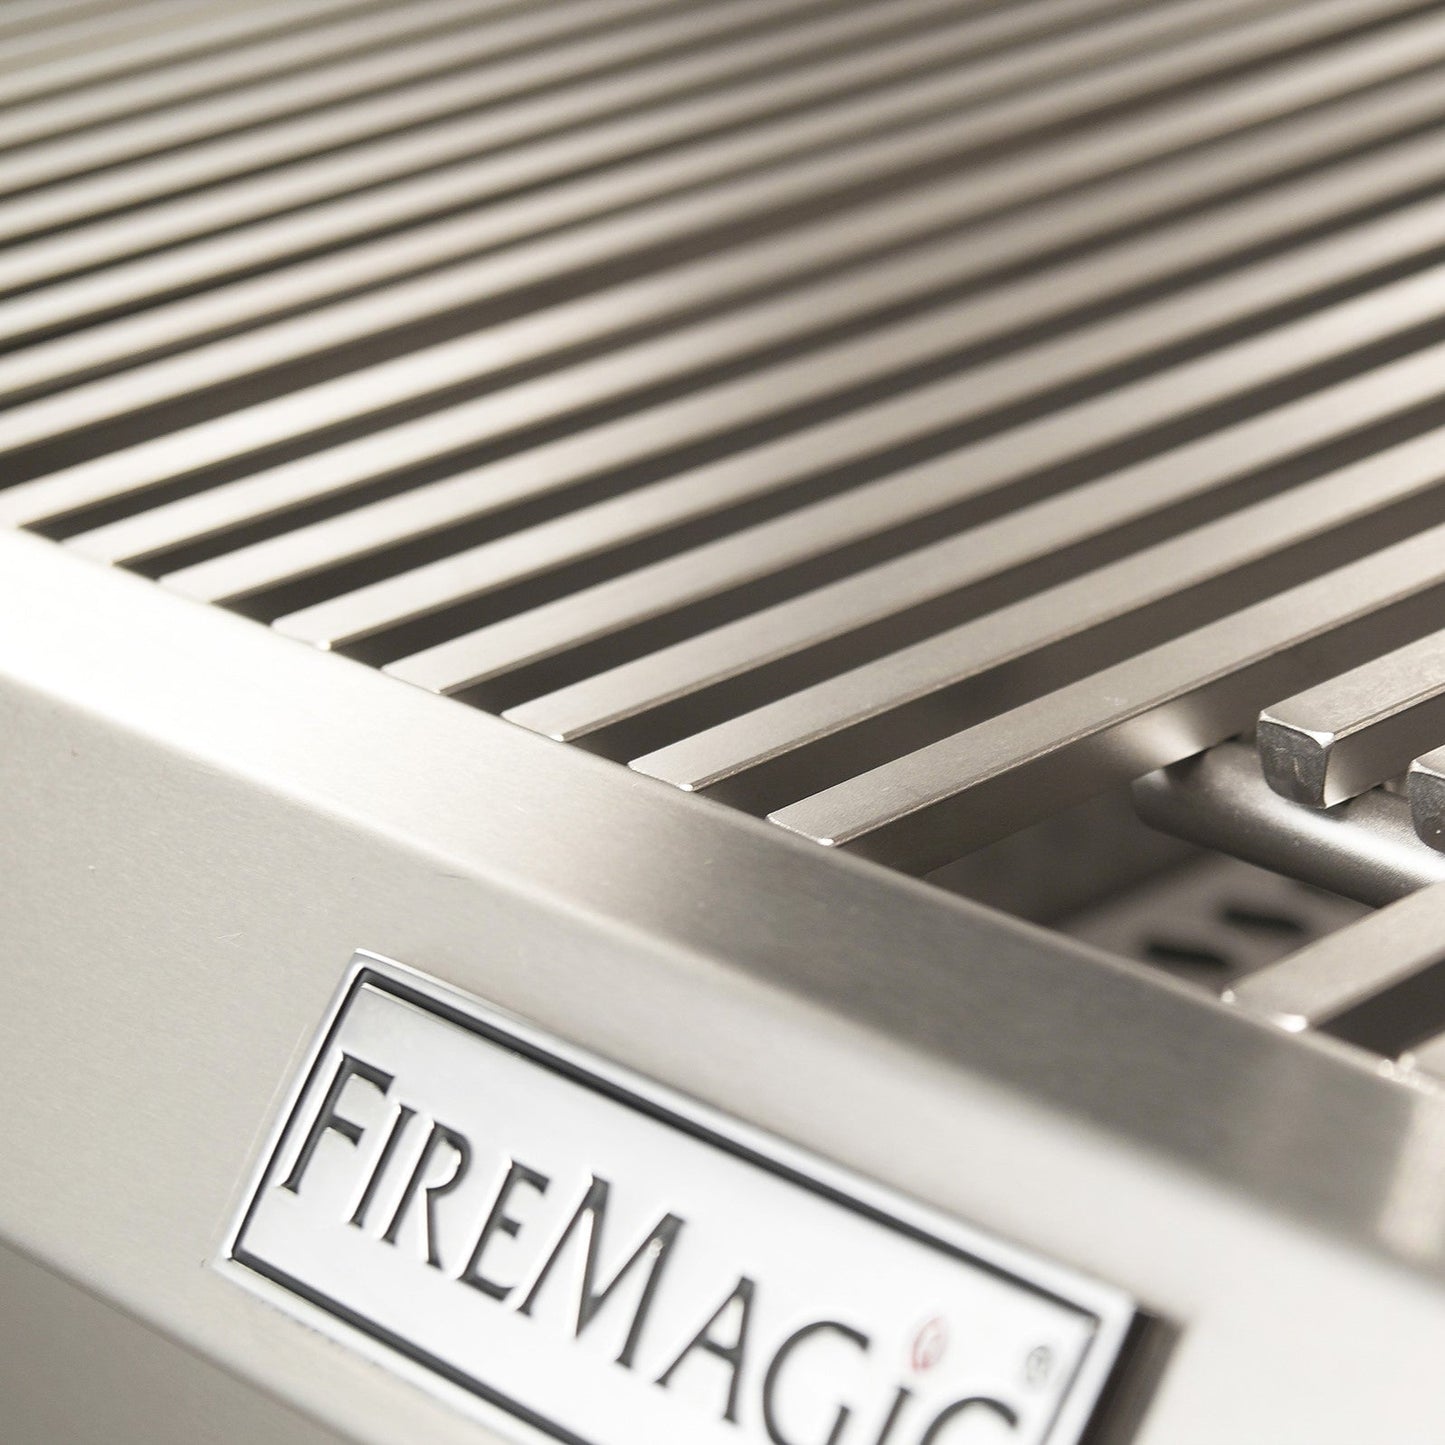 Firemagic 36 Inch Echelon Series Built-In Grill with Digital Thermometer - E790i-9E1N